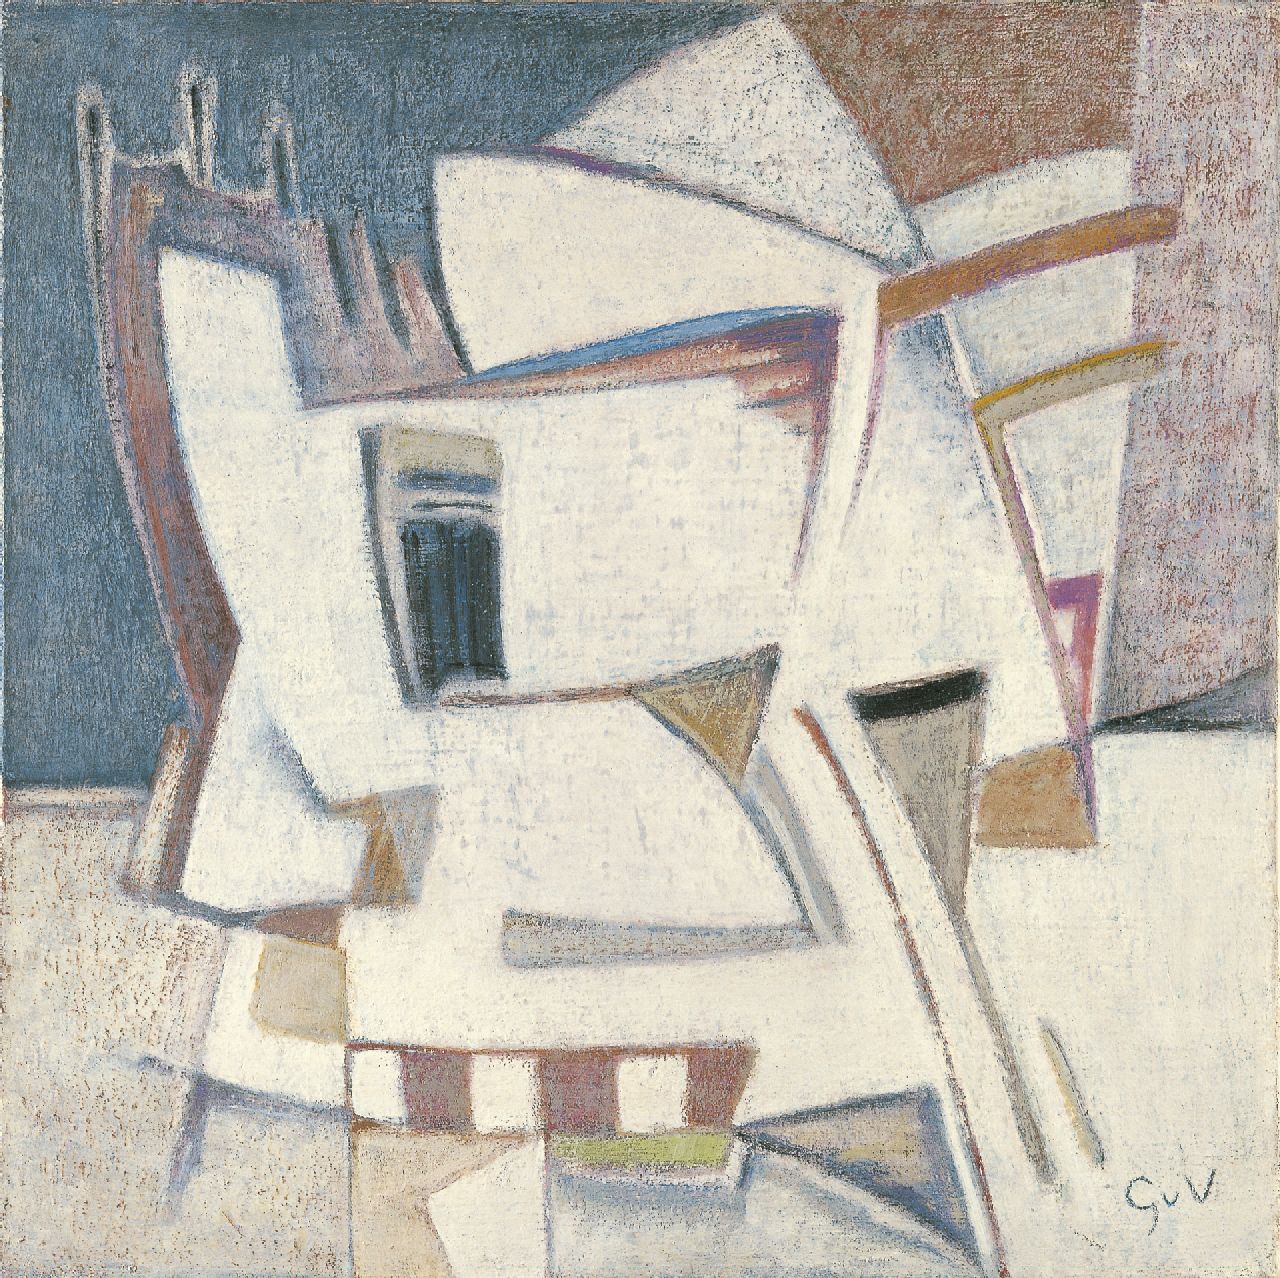 Velde G. van | Gerardus 'Geer' van Velde, Composition, oil on canvas 50.1 x 50.1 cm, signed l.r. with initials and on the reverse and painted circa 1971